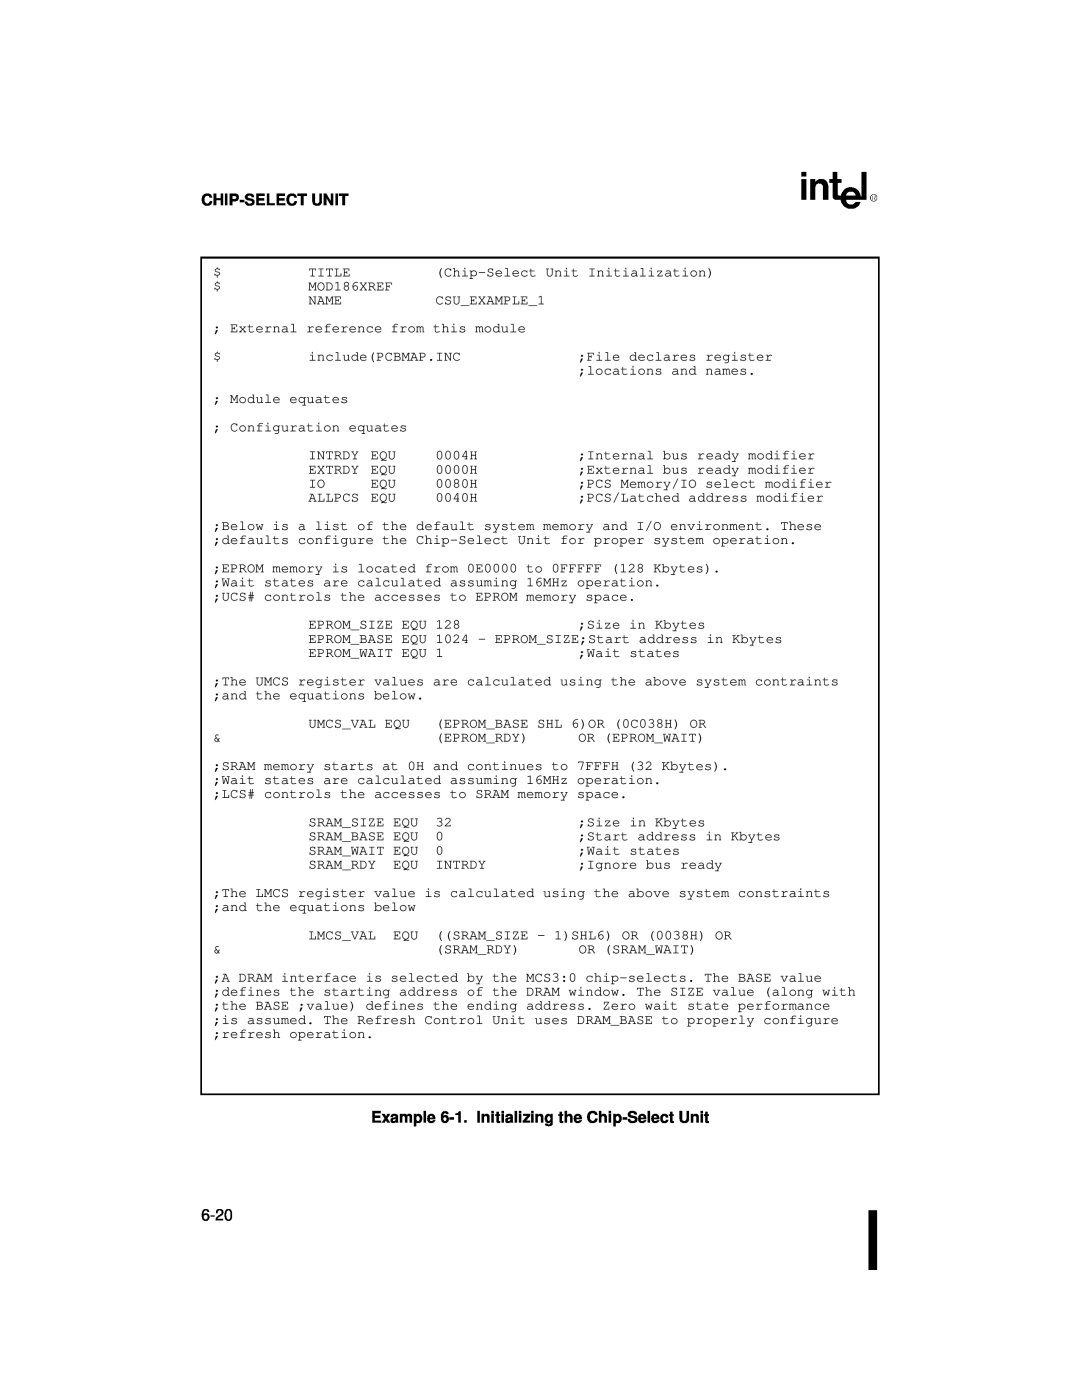 Intel 80C186XL, 80C188XL user manual Chip-Selectunit, Example 6-1.Initializing the Chip-SelectUnit 